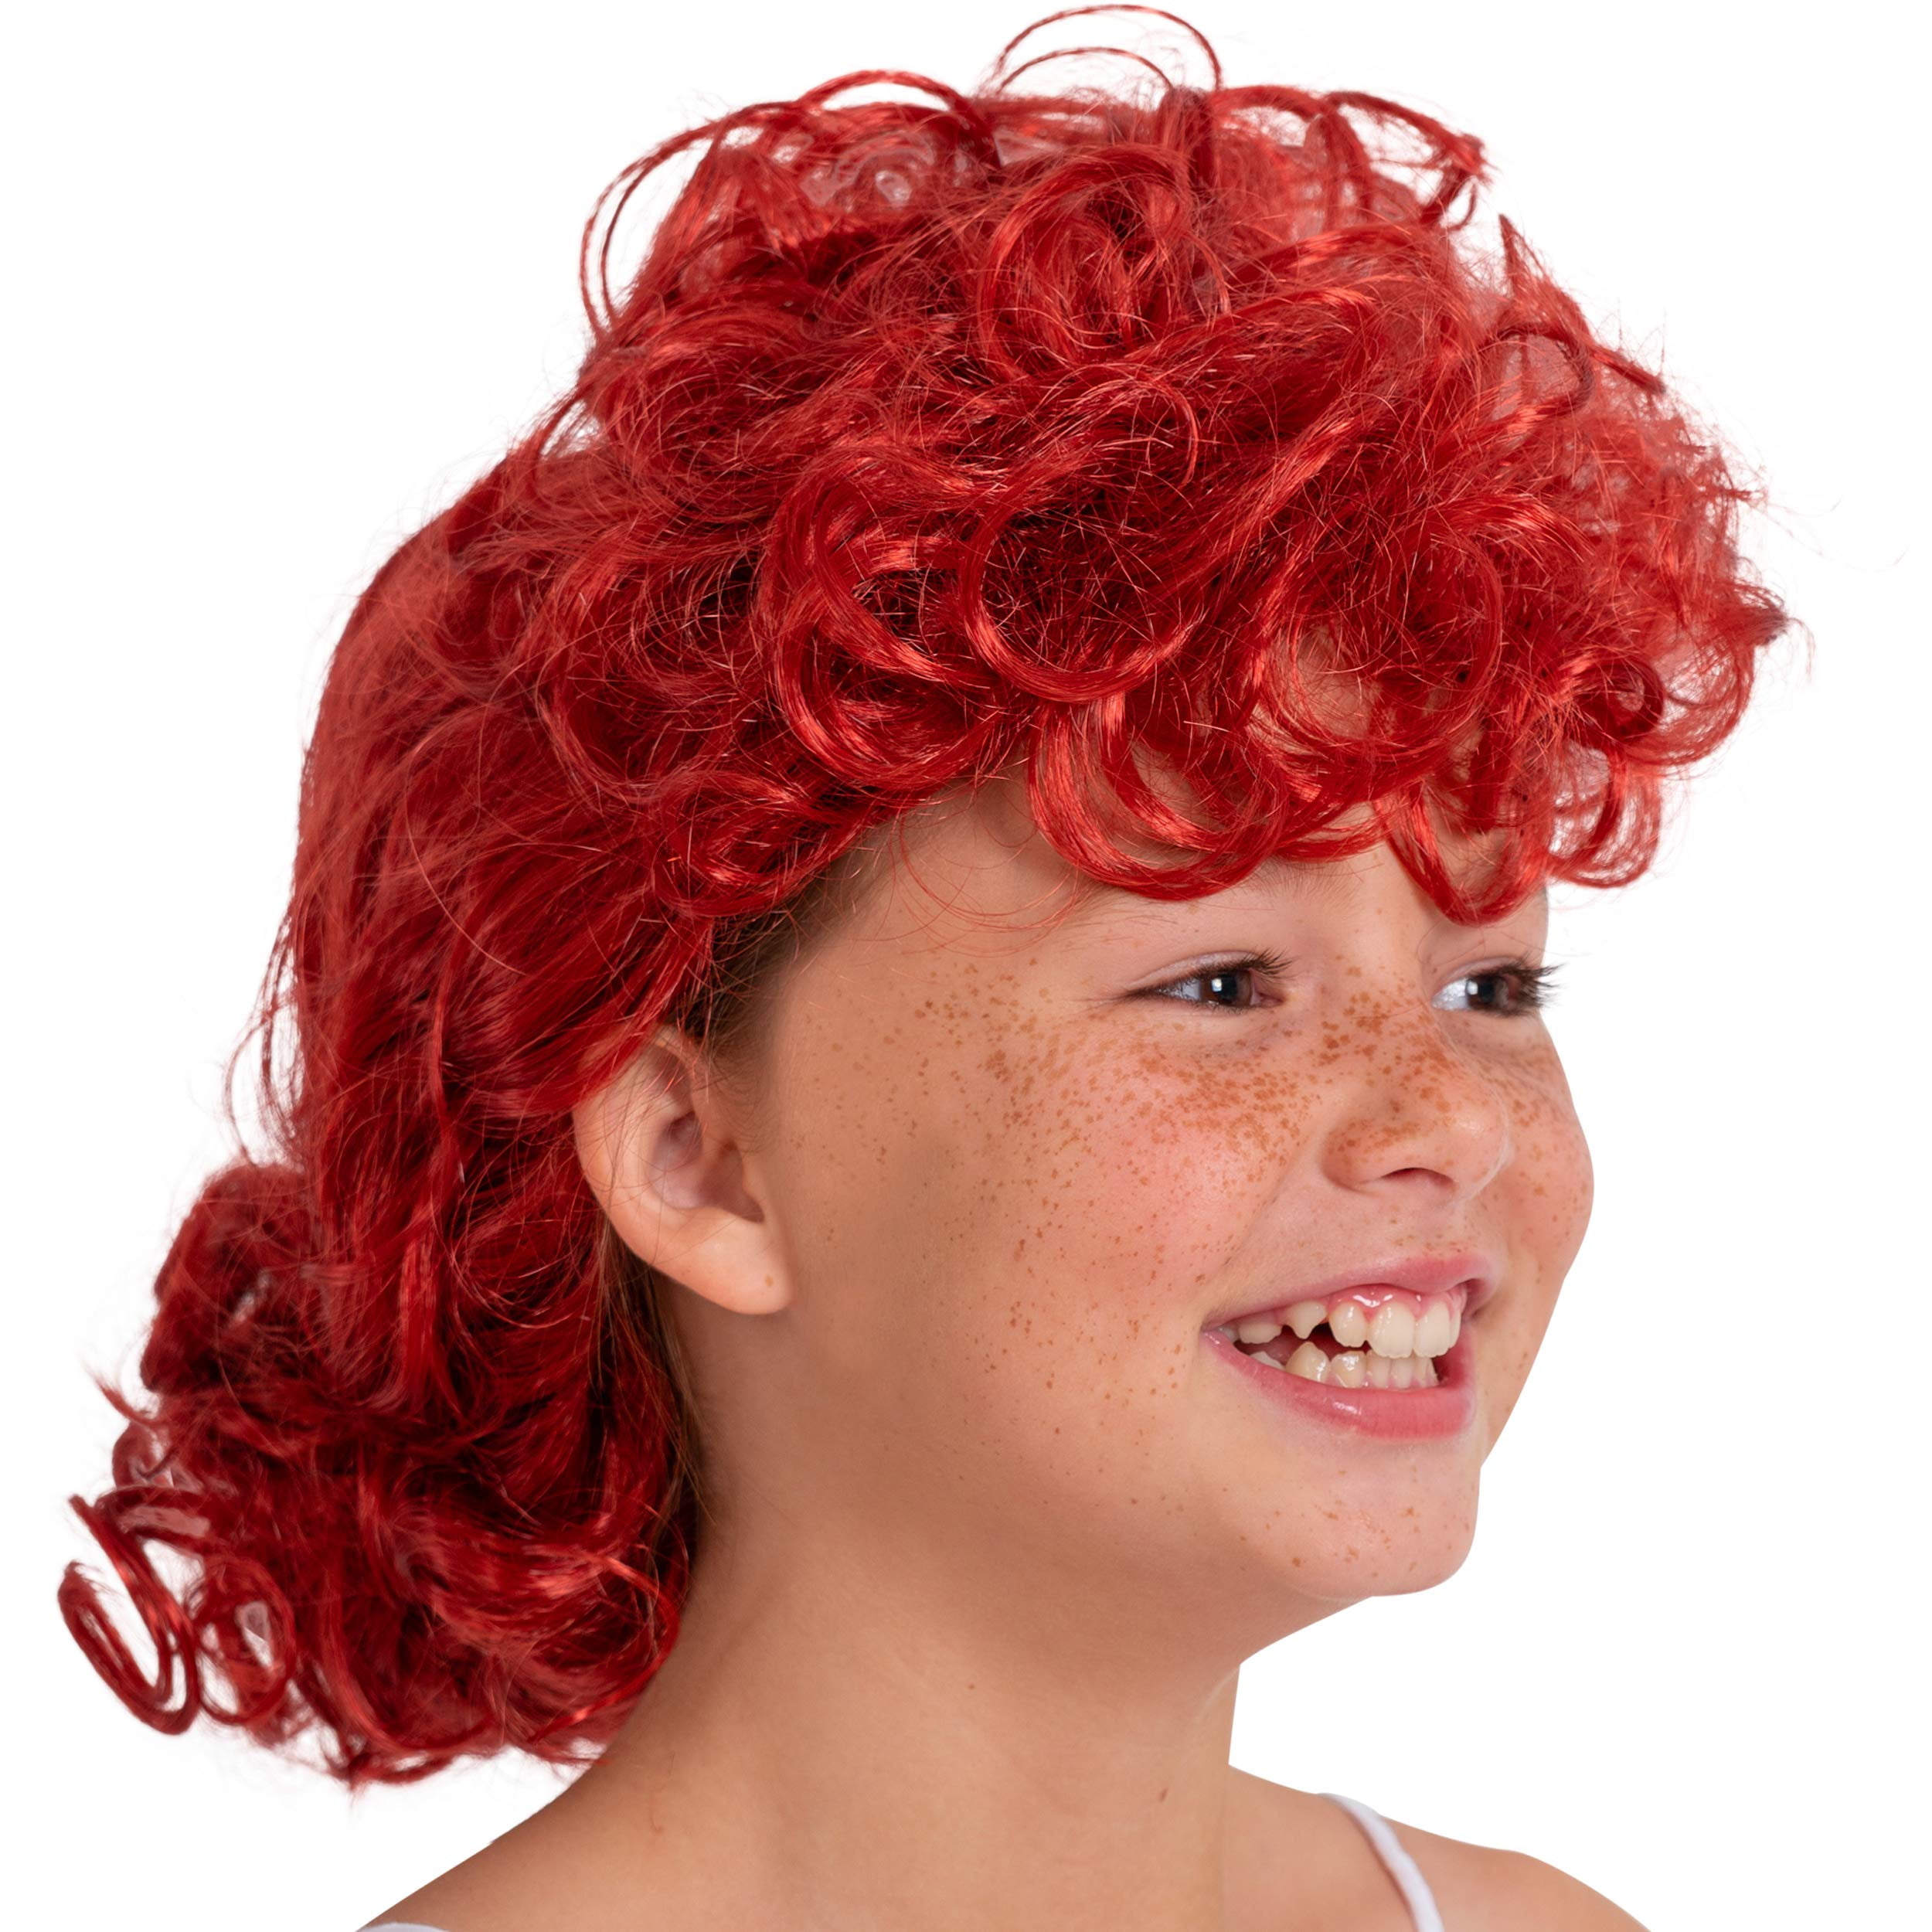 Super Seventies Adult Costume Wig Red